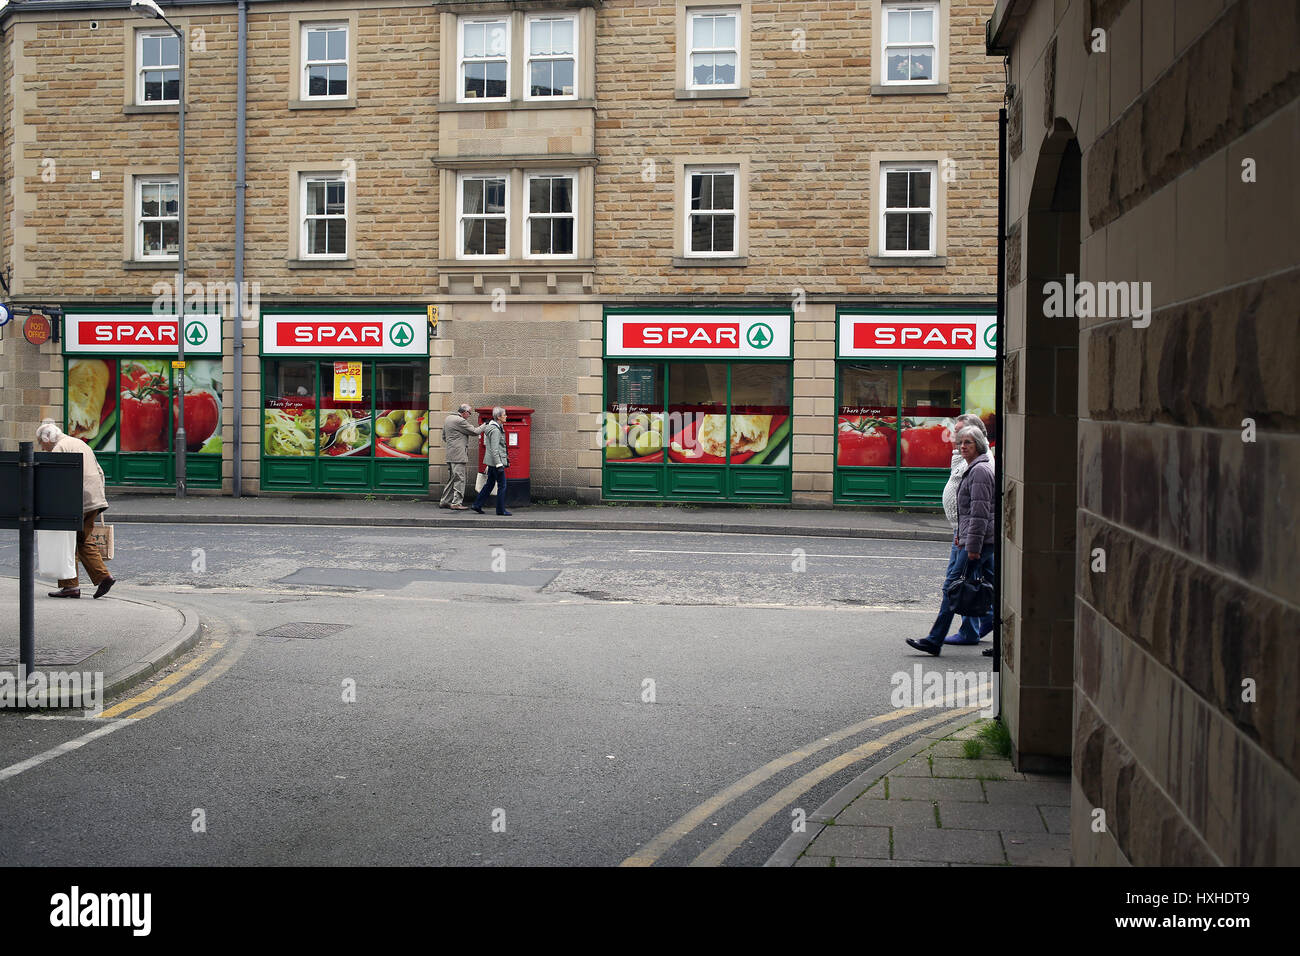 Spar convenience store Bakewell town Derbyshire Stock Photo